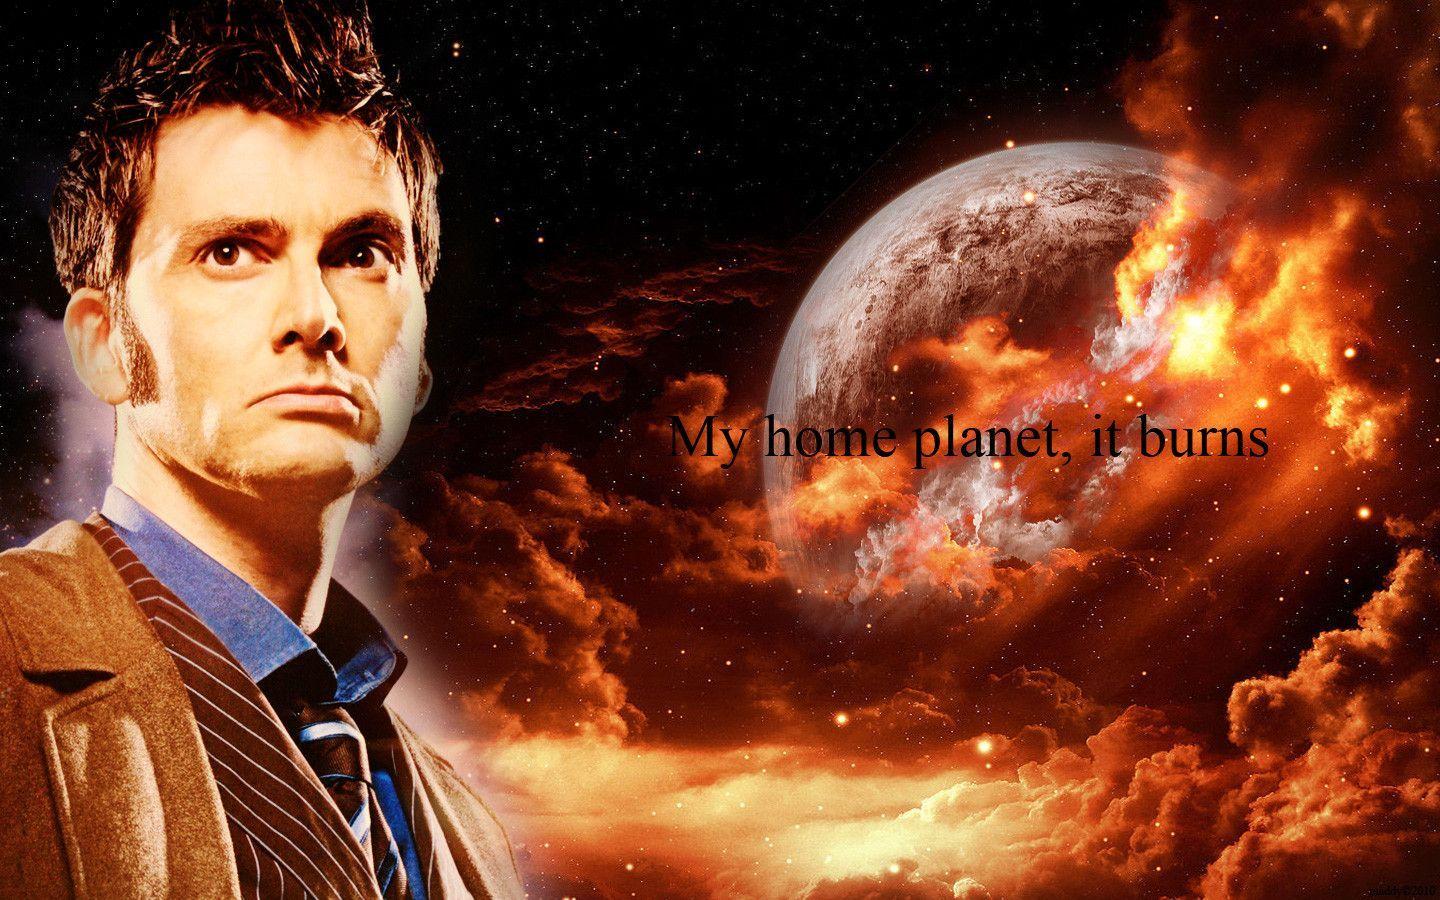 The Tenth Doctor Tenth Doctor Wallpaper